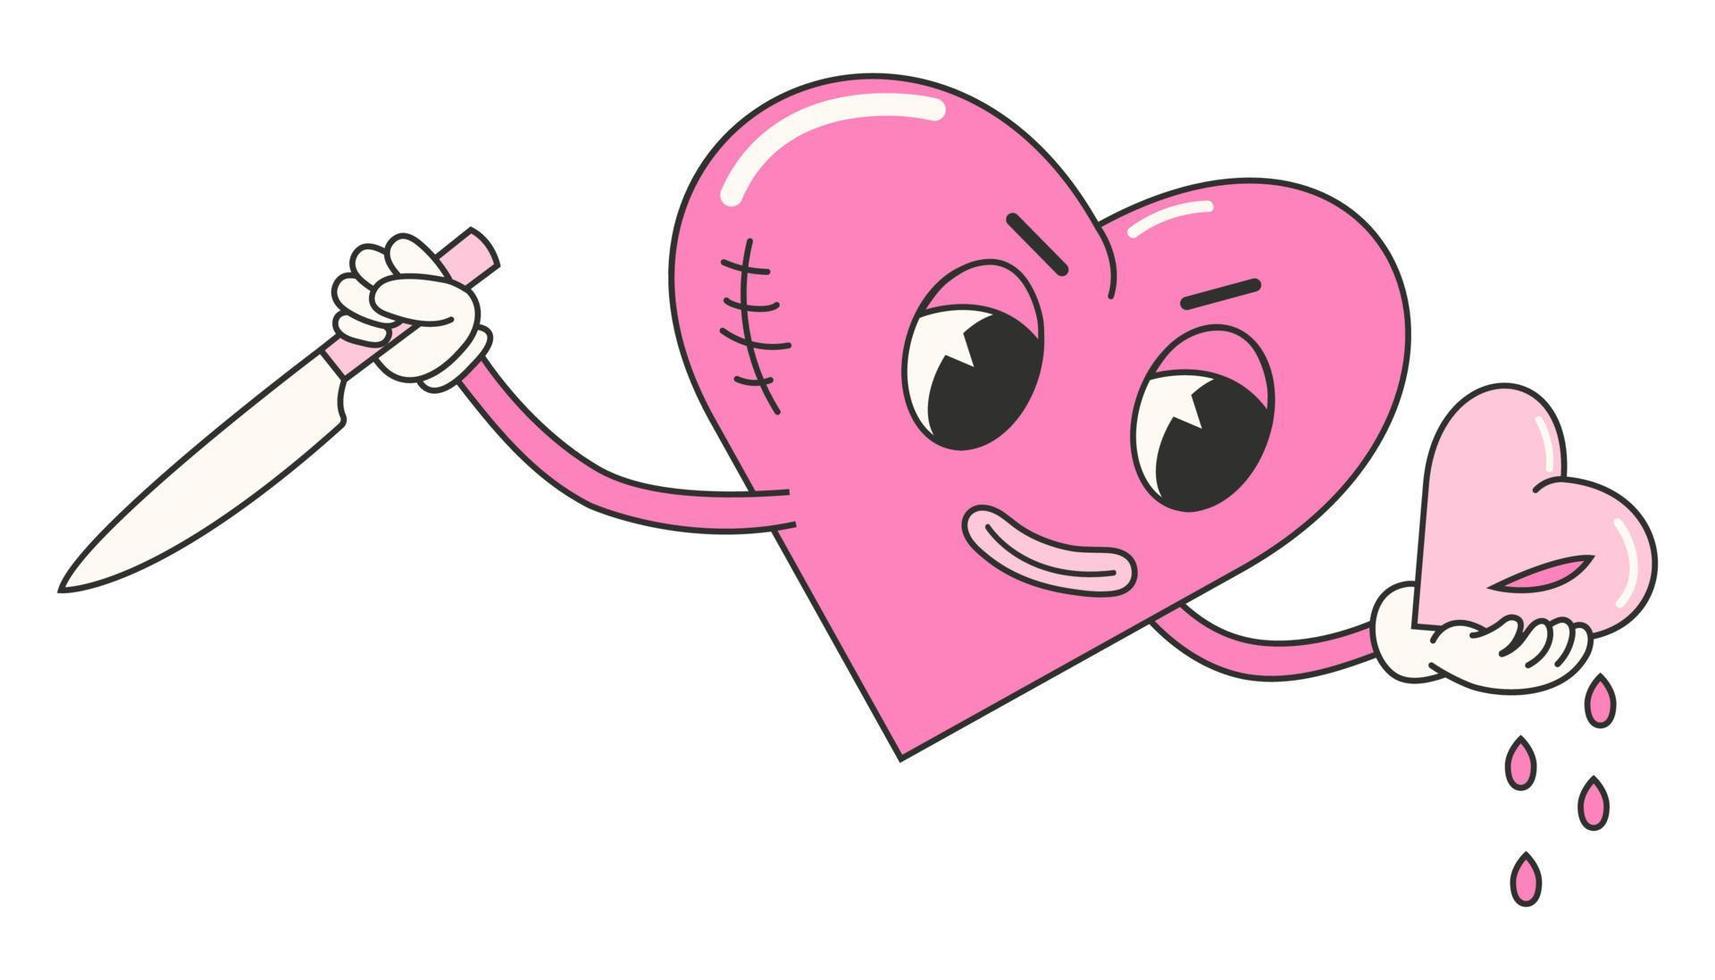 Trendy y2k anti valentines day sticker. 2000s anti valentines day conception. Cartoon character vector